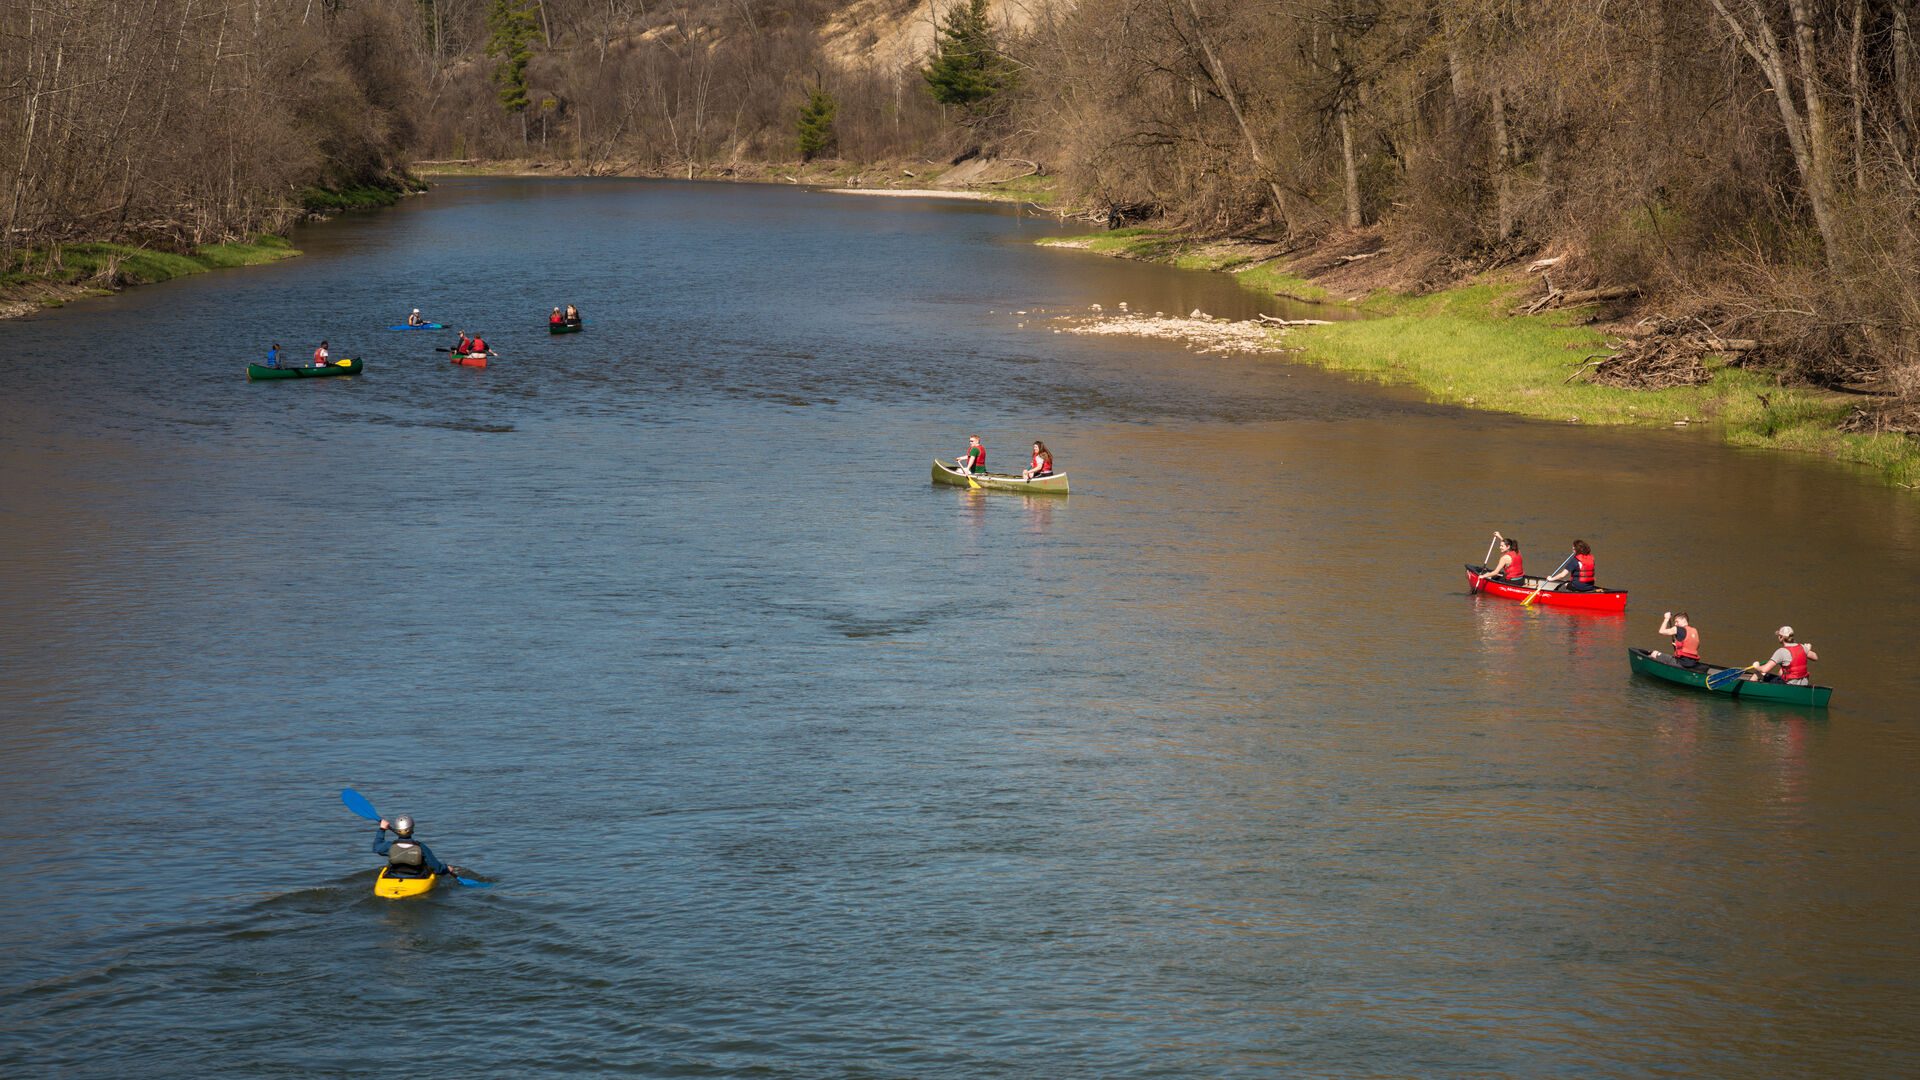 Houghton students canoeing on the Genesee River.